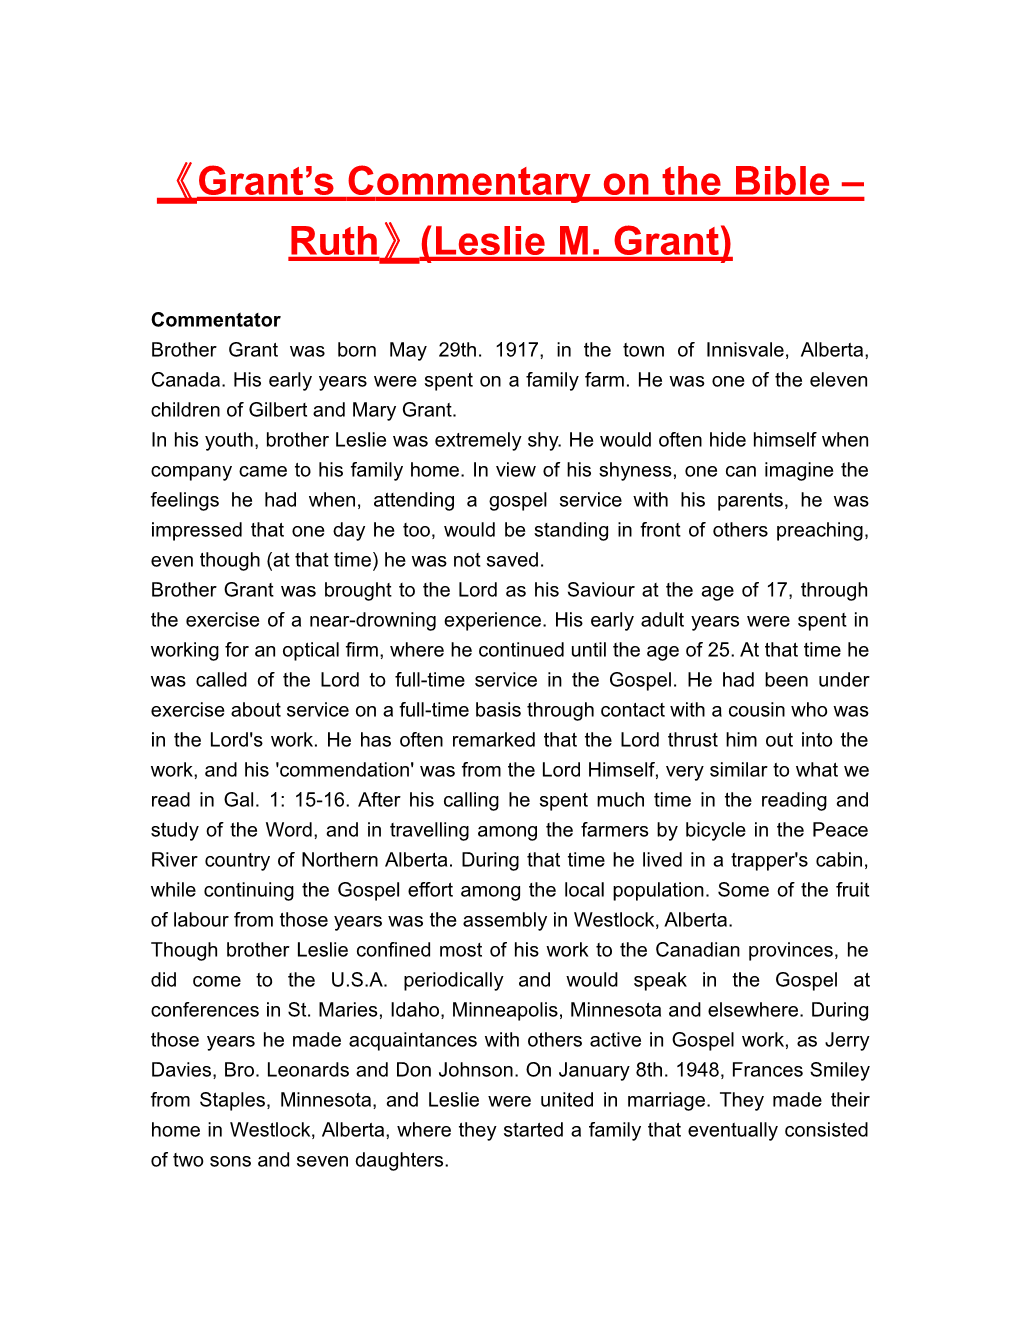 Grant Scommentaryon the Bible Ruth (Leslie M. Grant)